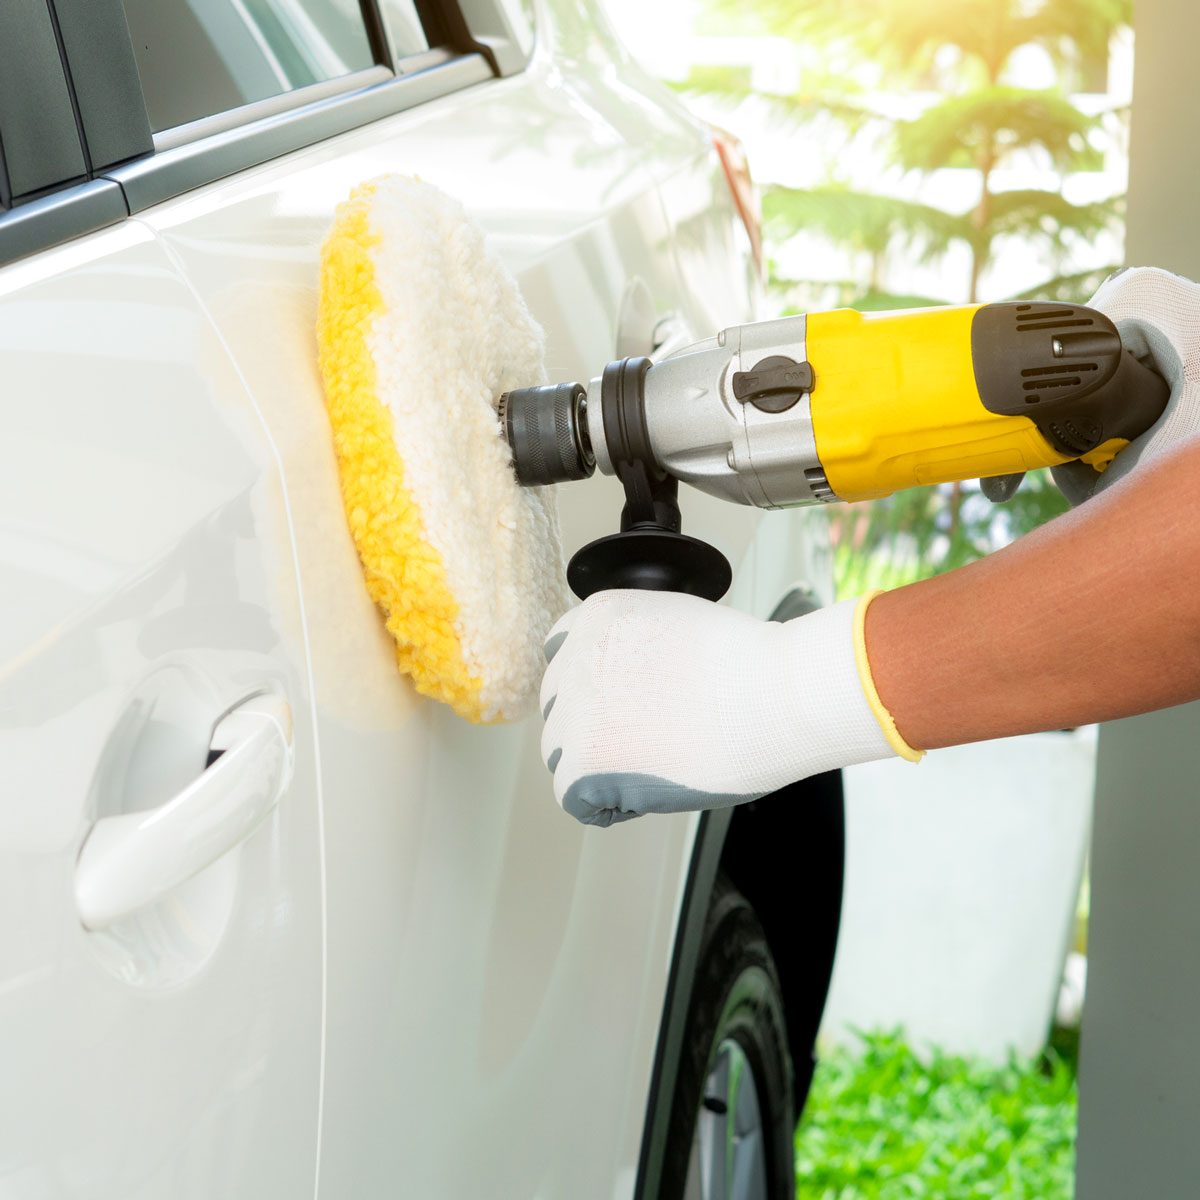 Car polishing compounds are a valuable tool for restoring and